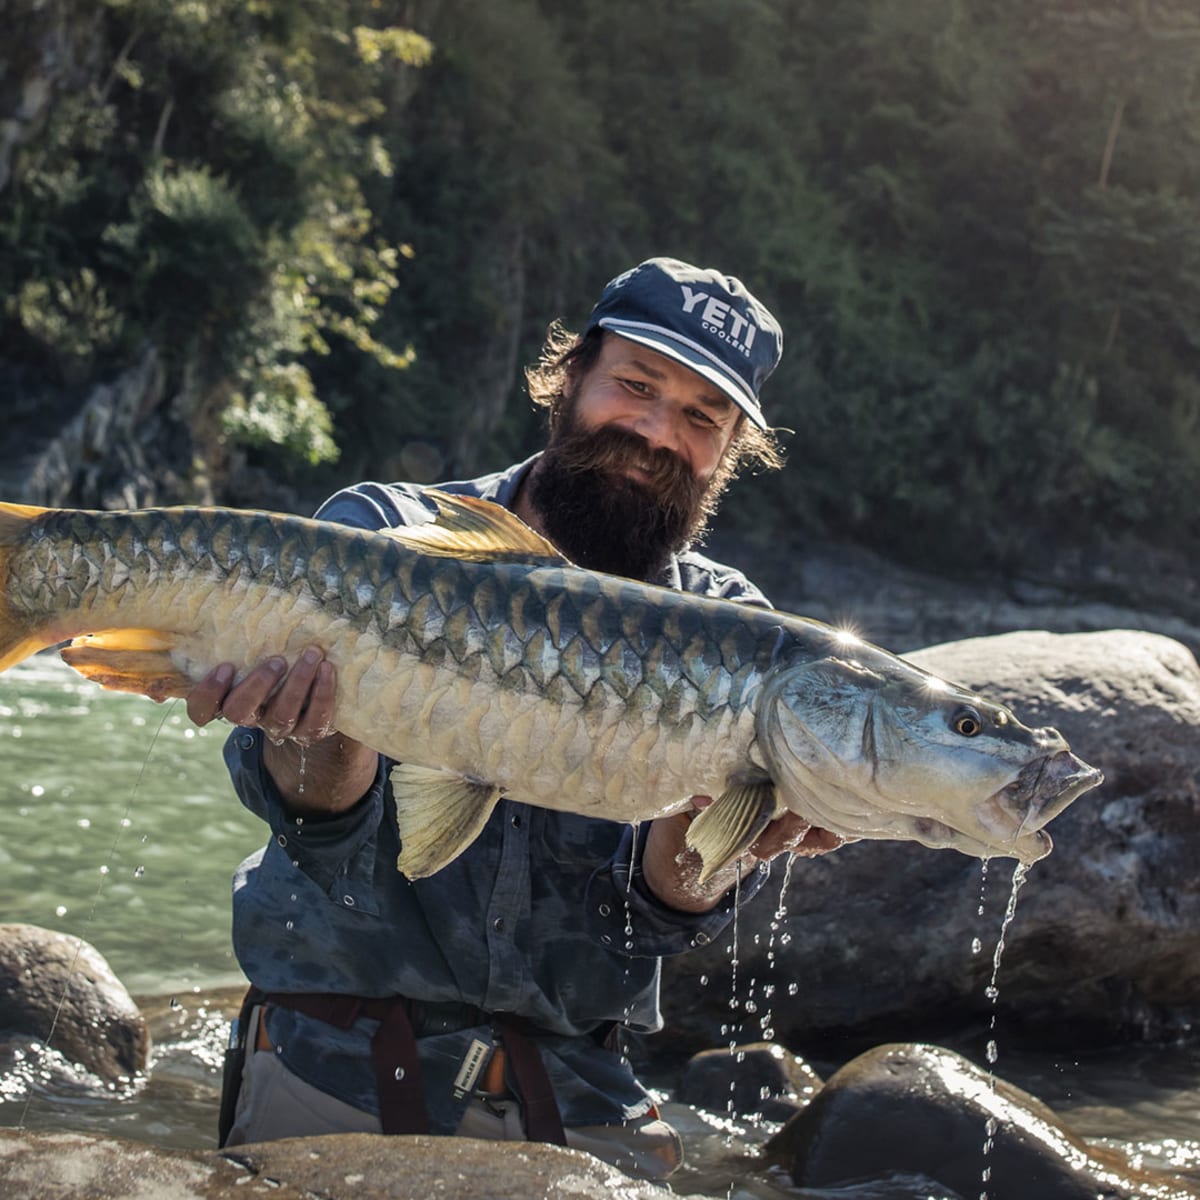 Angler Oliver White on Fishing in Bhutan for 'A Thousand Casts